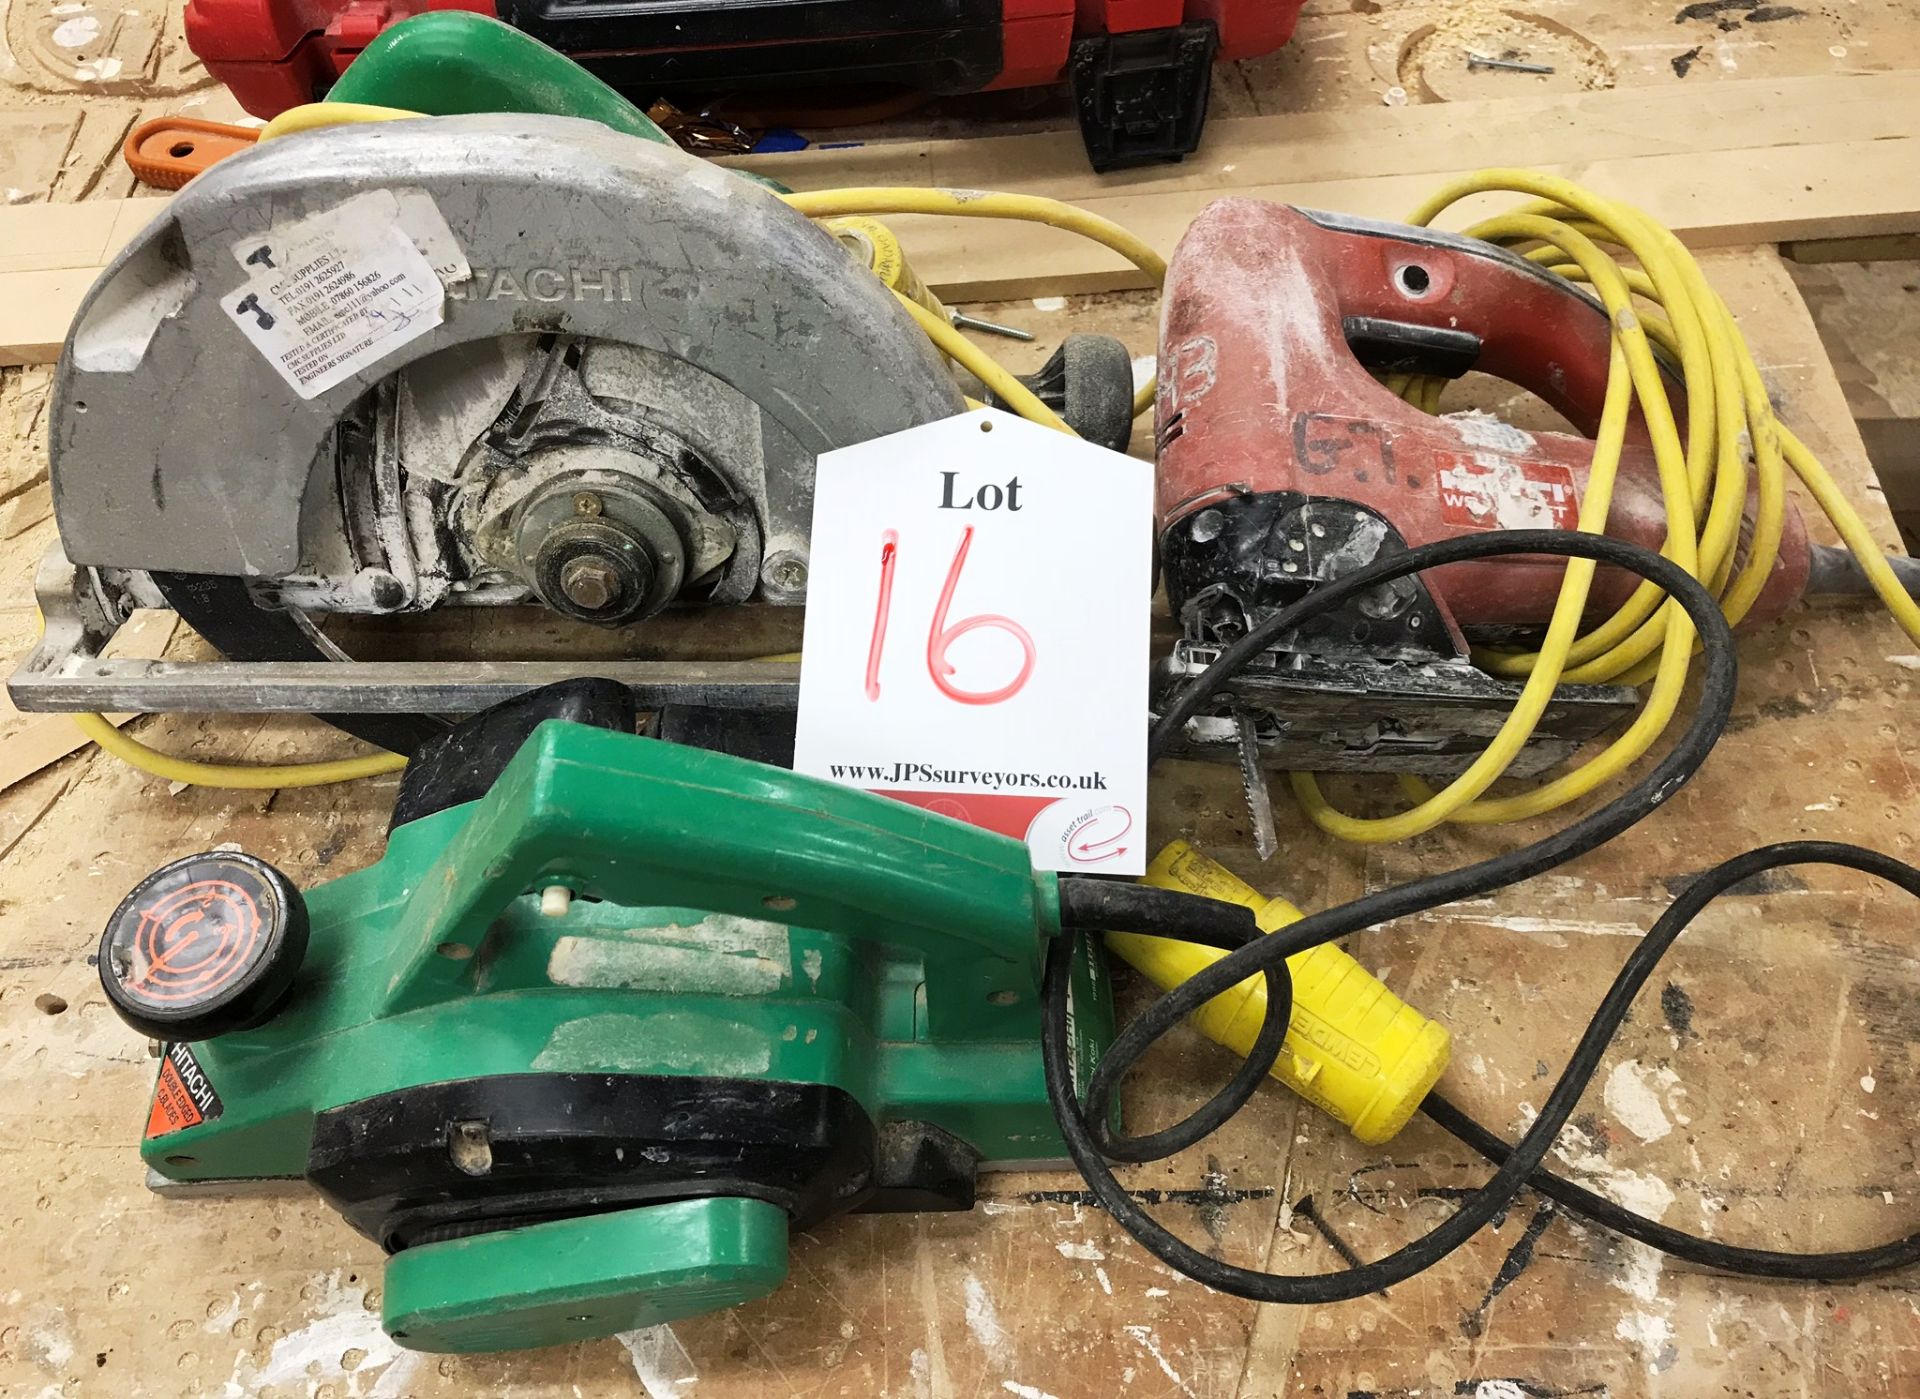 3 x Various Power Tools 110V - As pictured